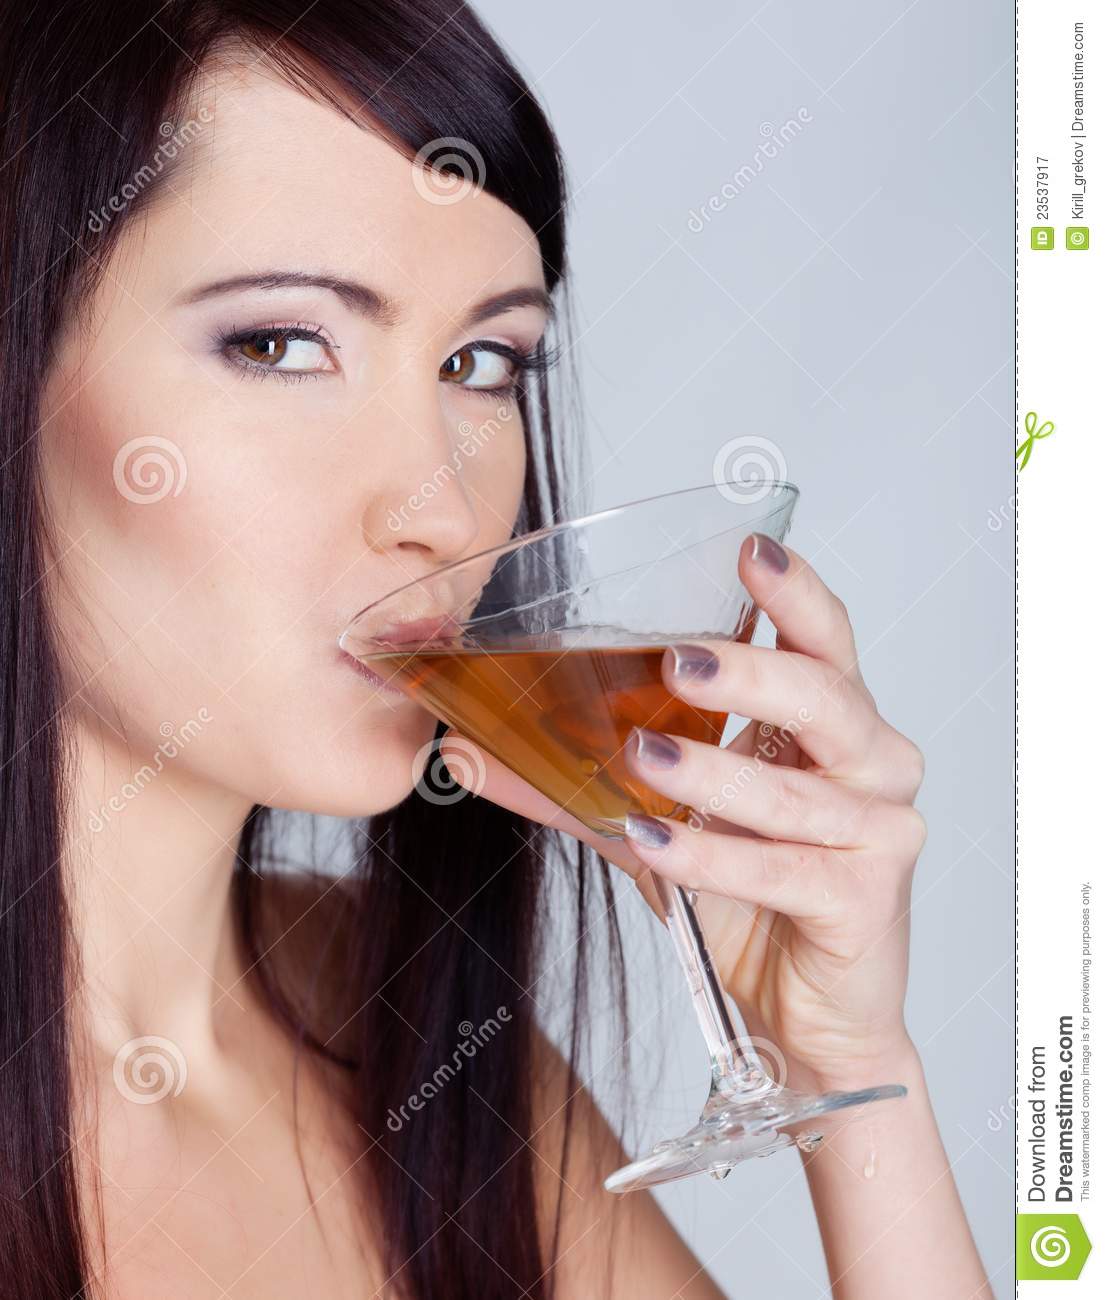 Girl Drinking Wine From Goblet Royalty Free Stock Photography   Image